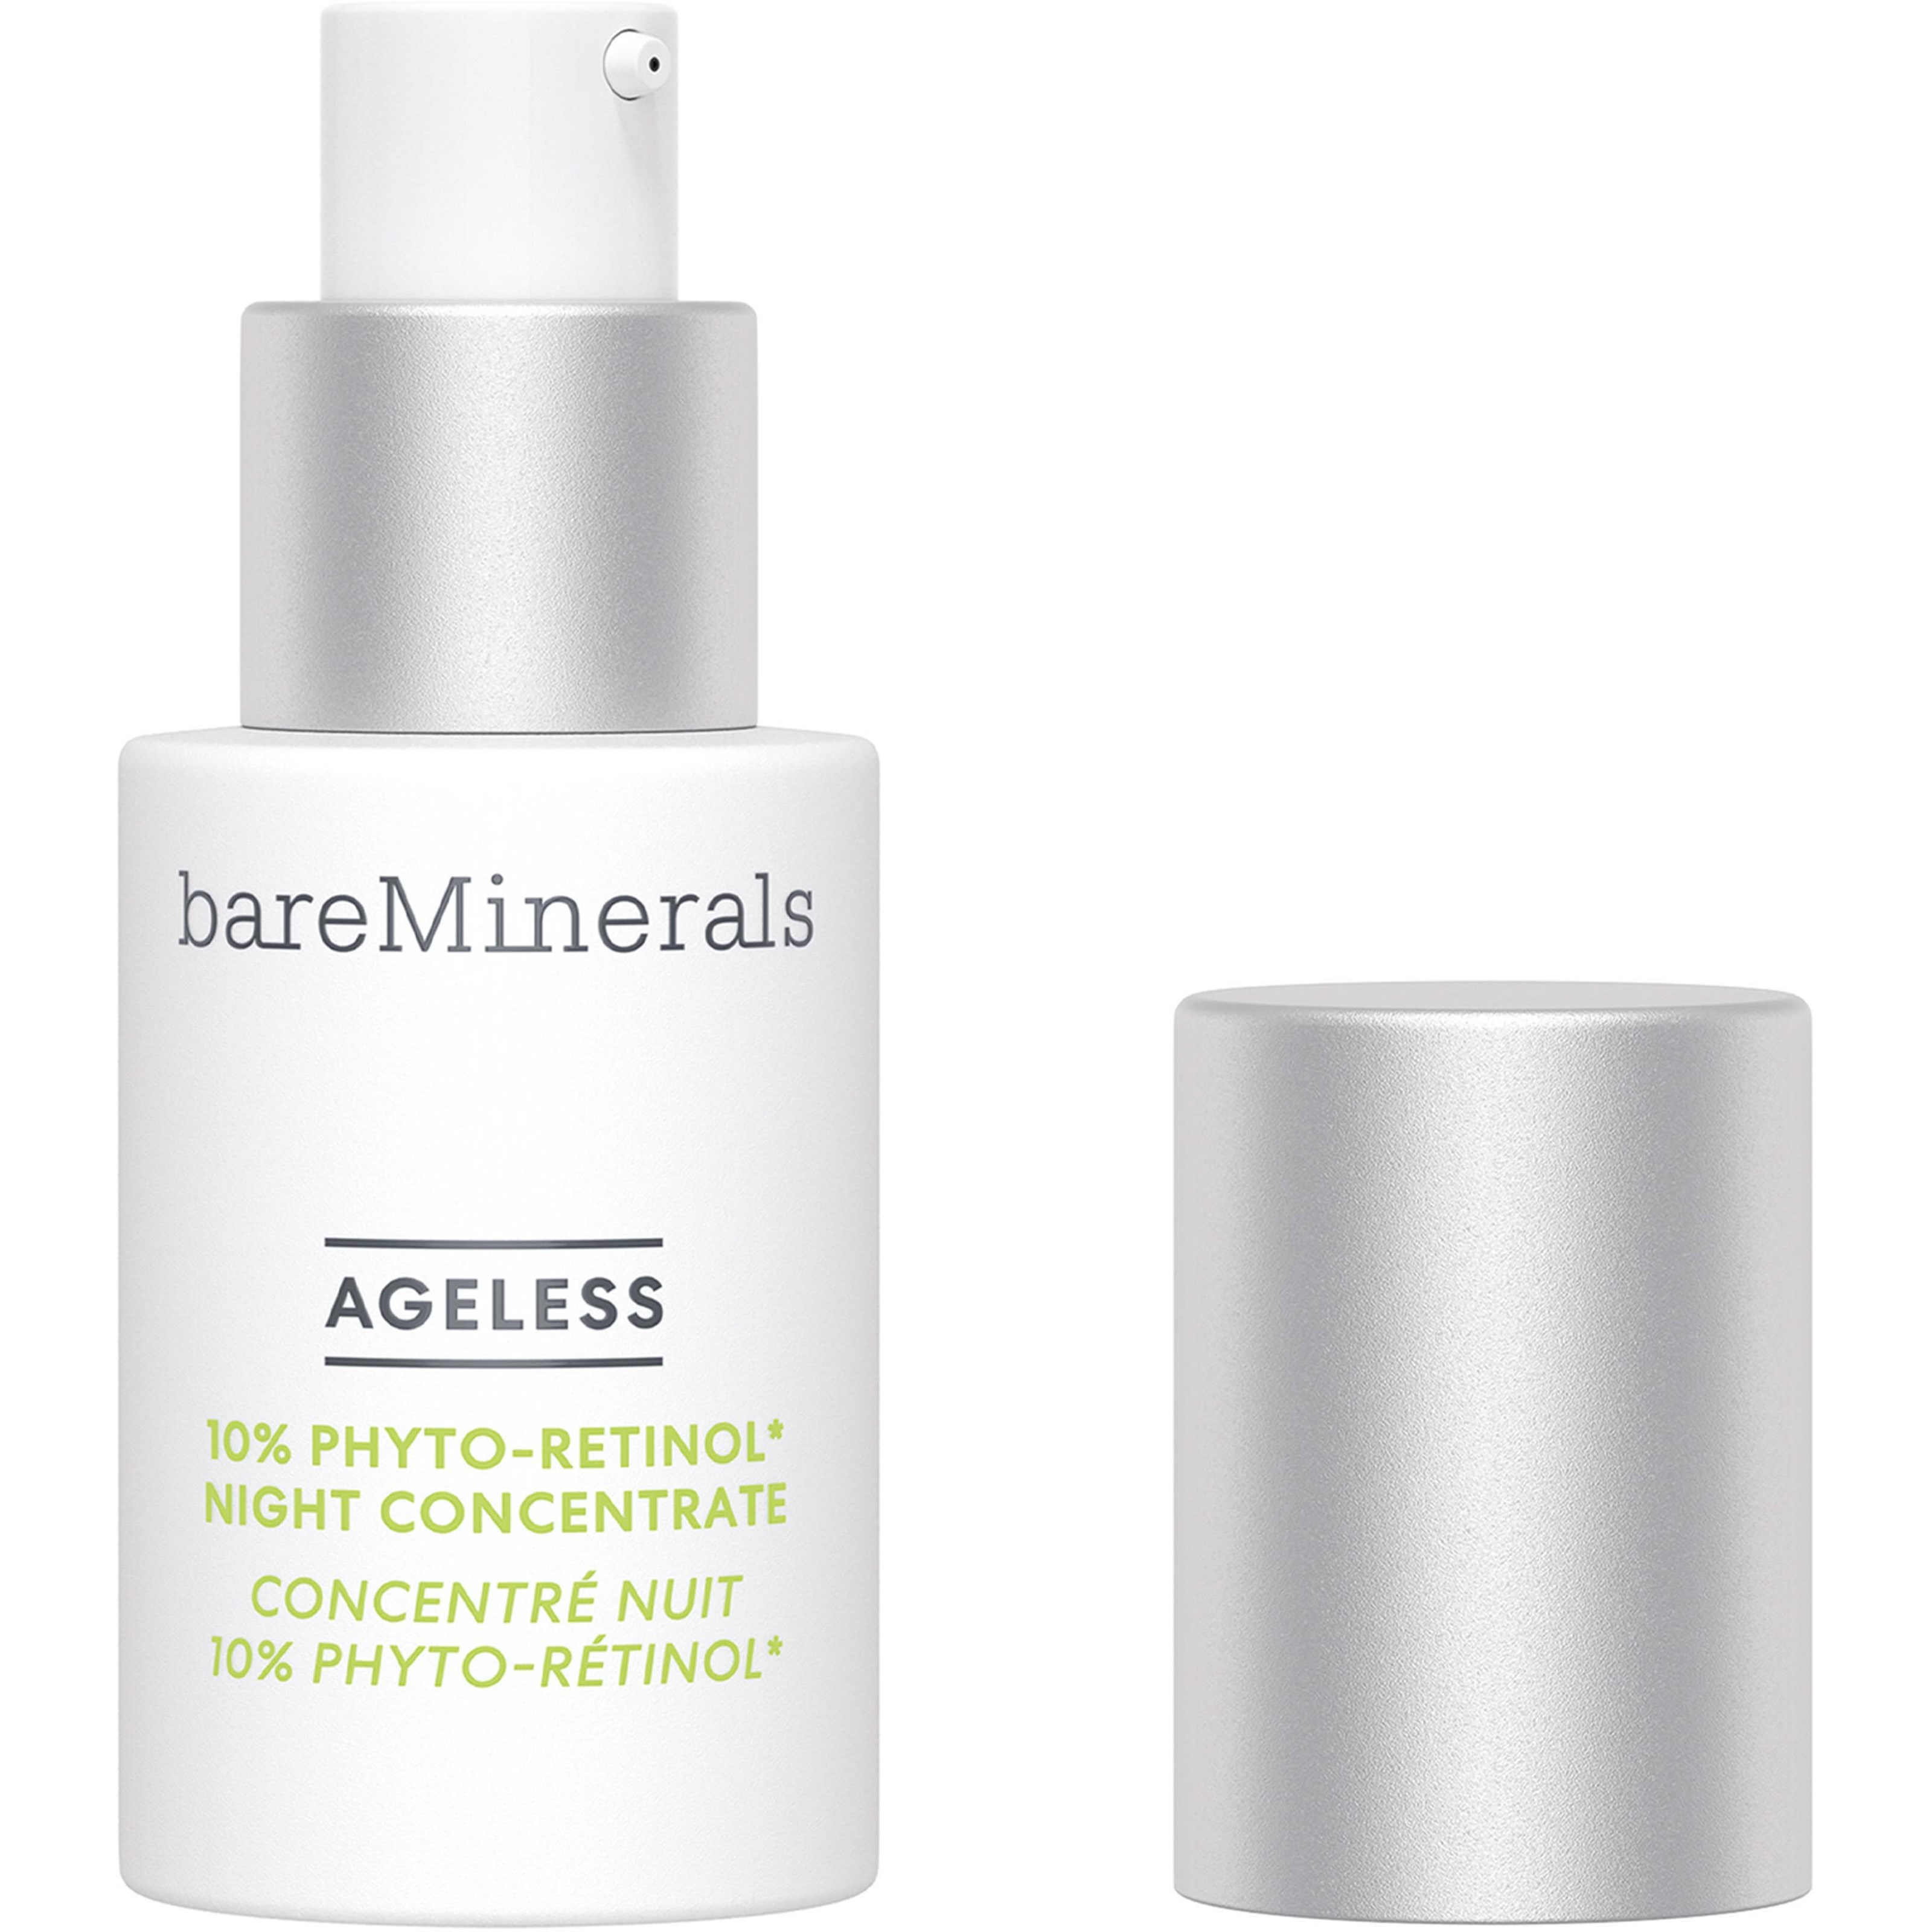 bareMinerals Ageless 10% Phyto-Retinol Night Concentrate Beauty To Go